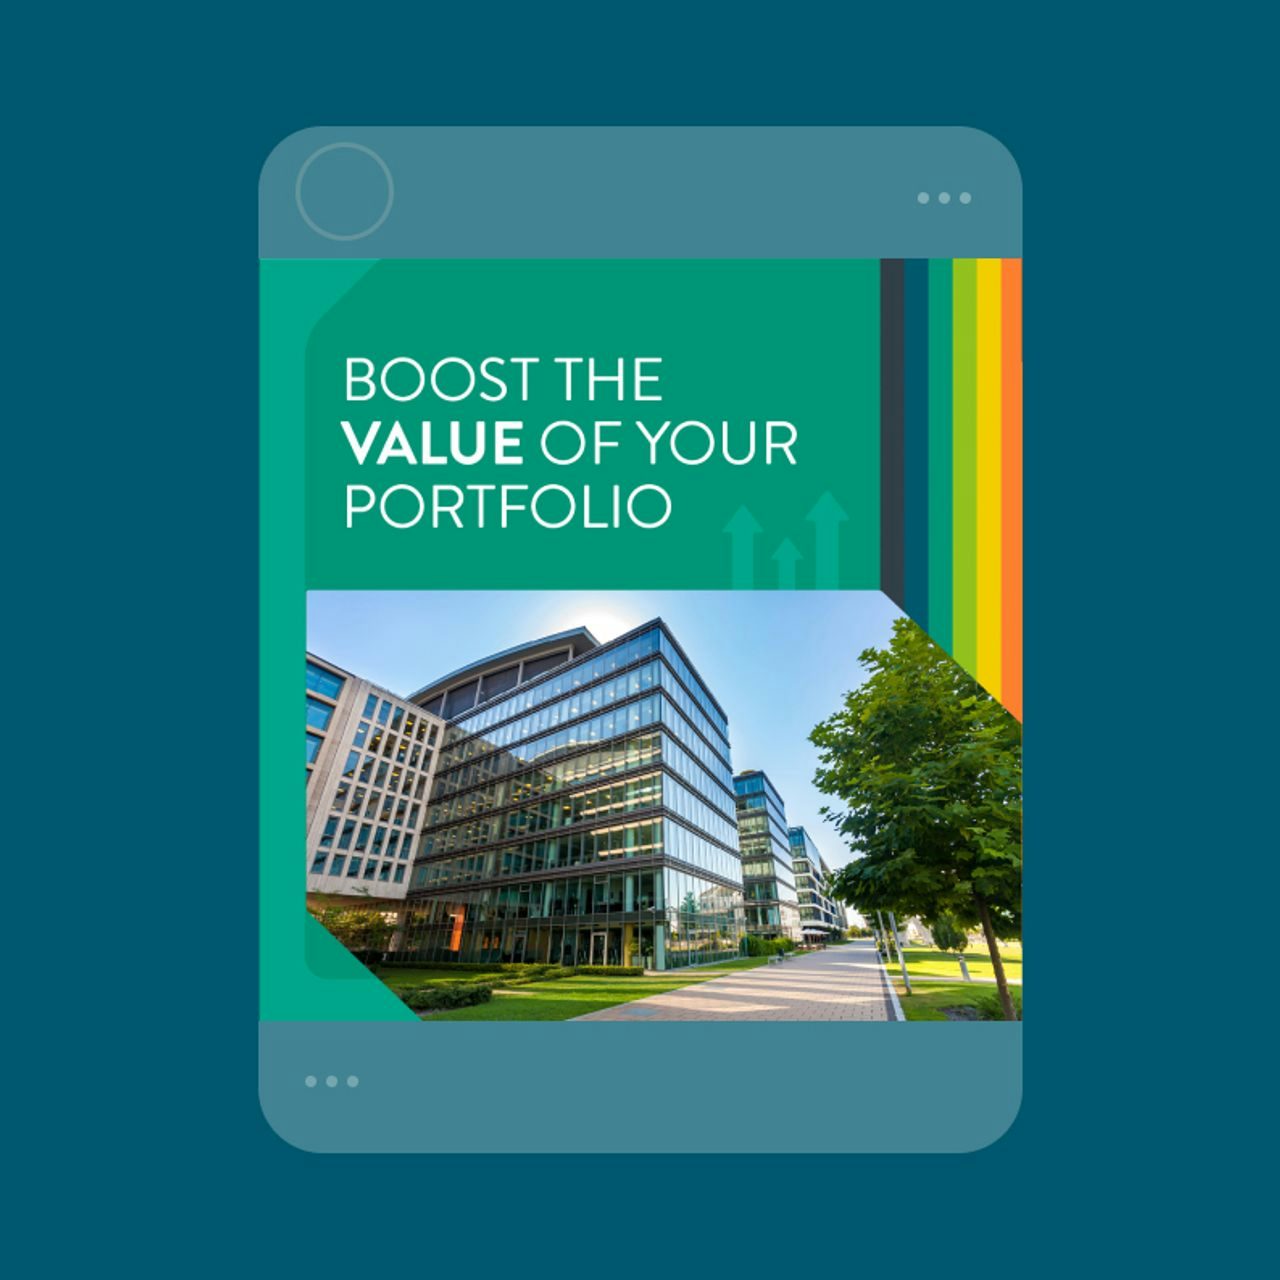 Digital ad with a teal header stating 'BOOST THE VALUE OF YOUR PORTFOLIO,' alongside upward-trending stripes and a photo of modern office buildings.